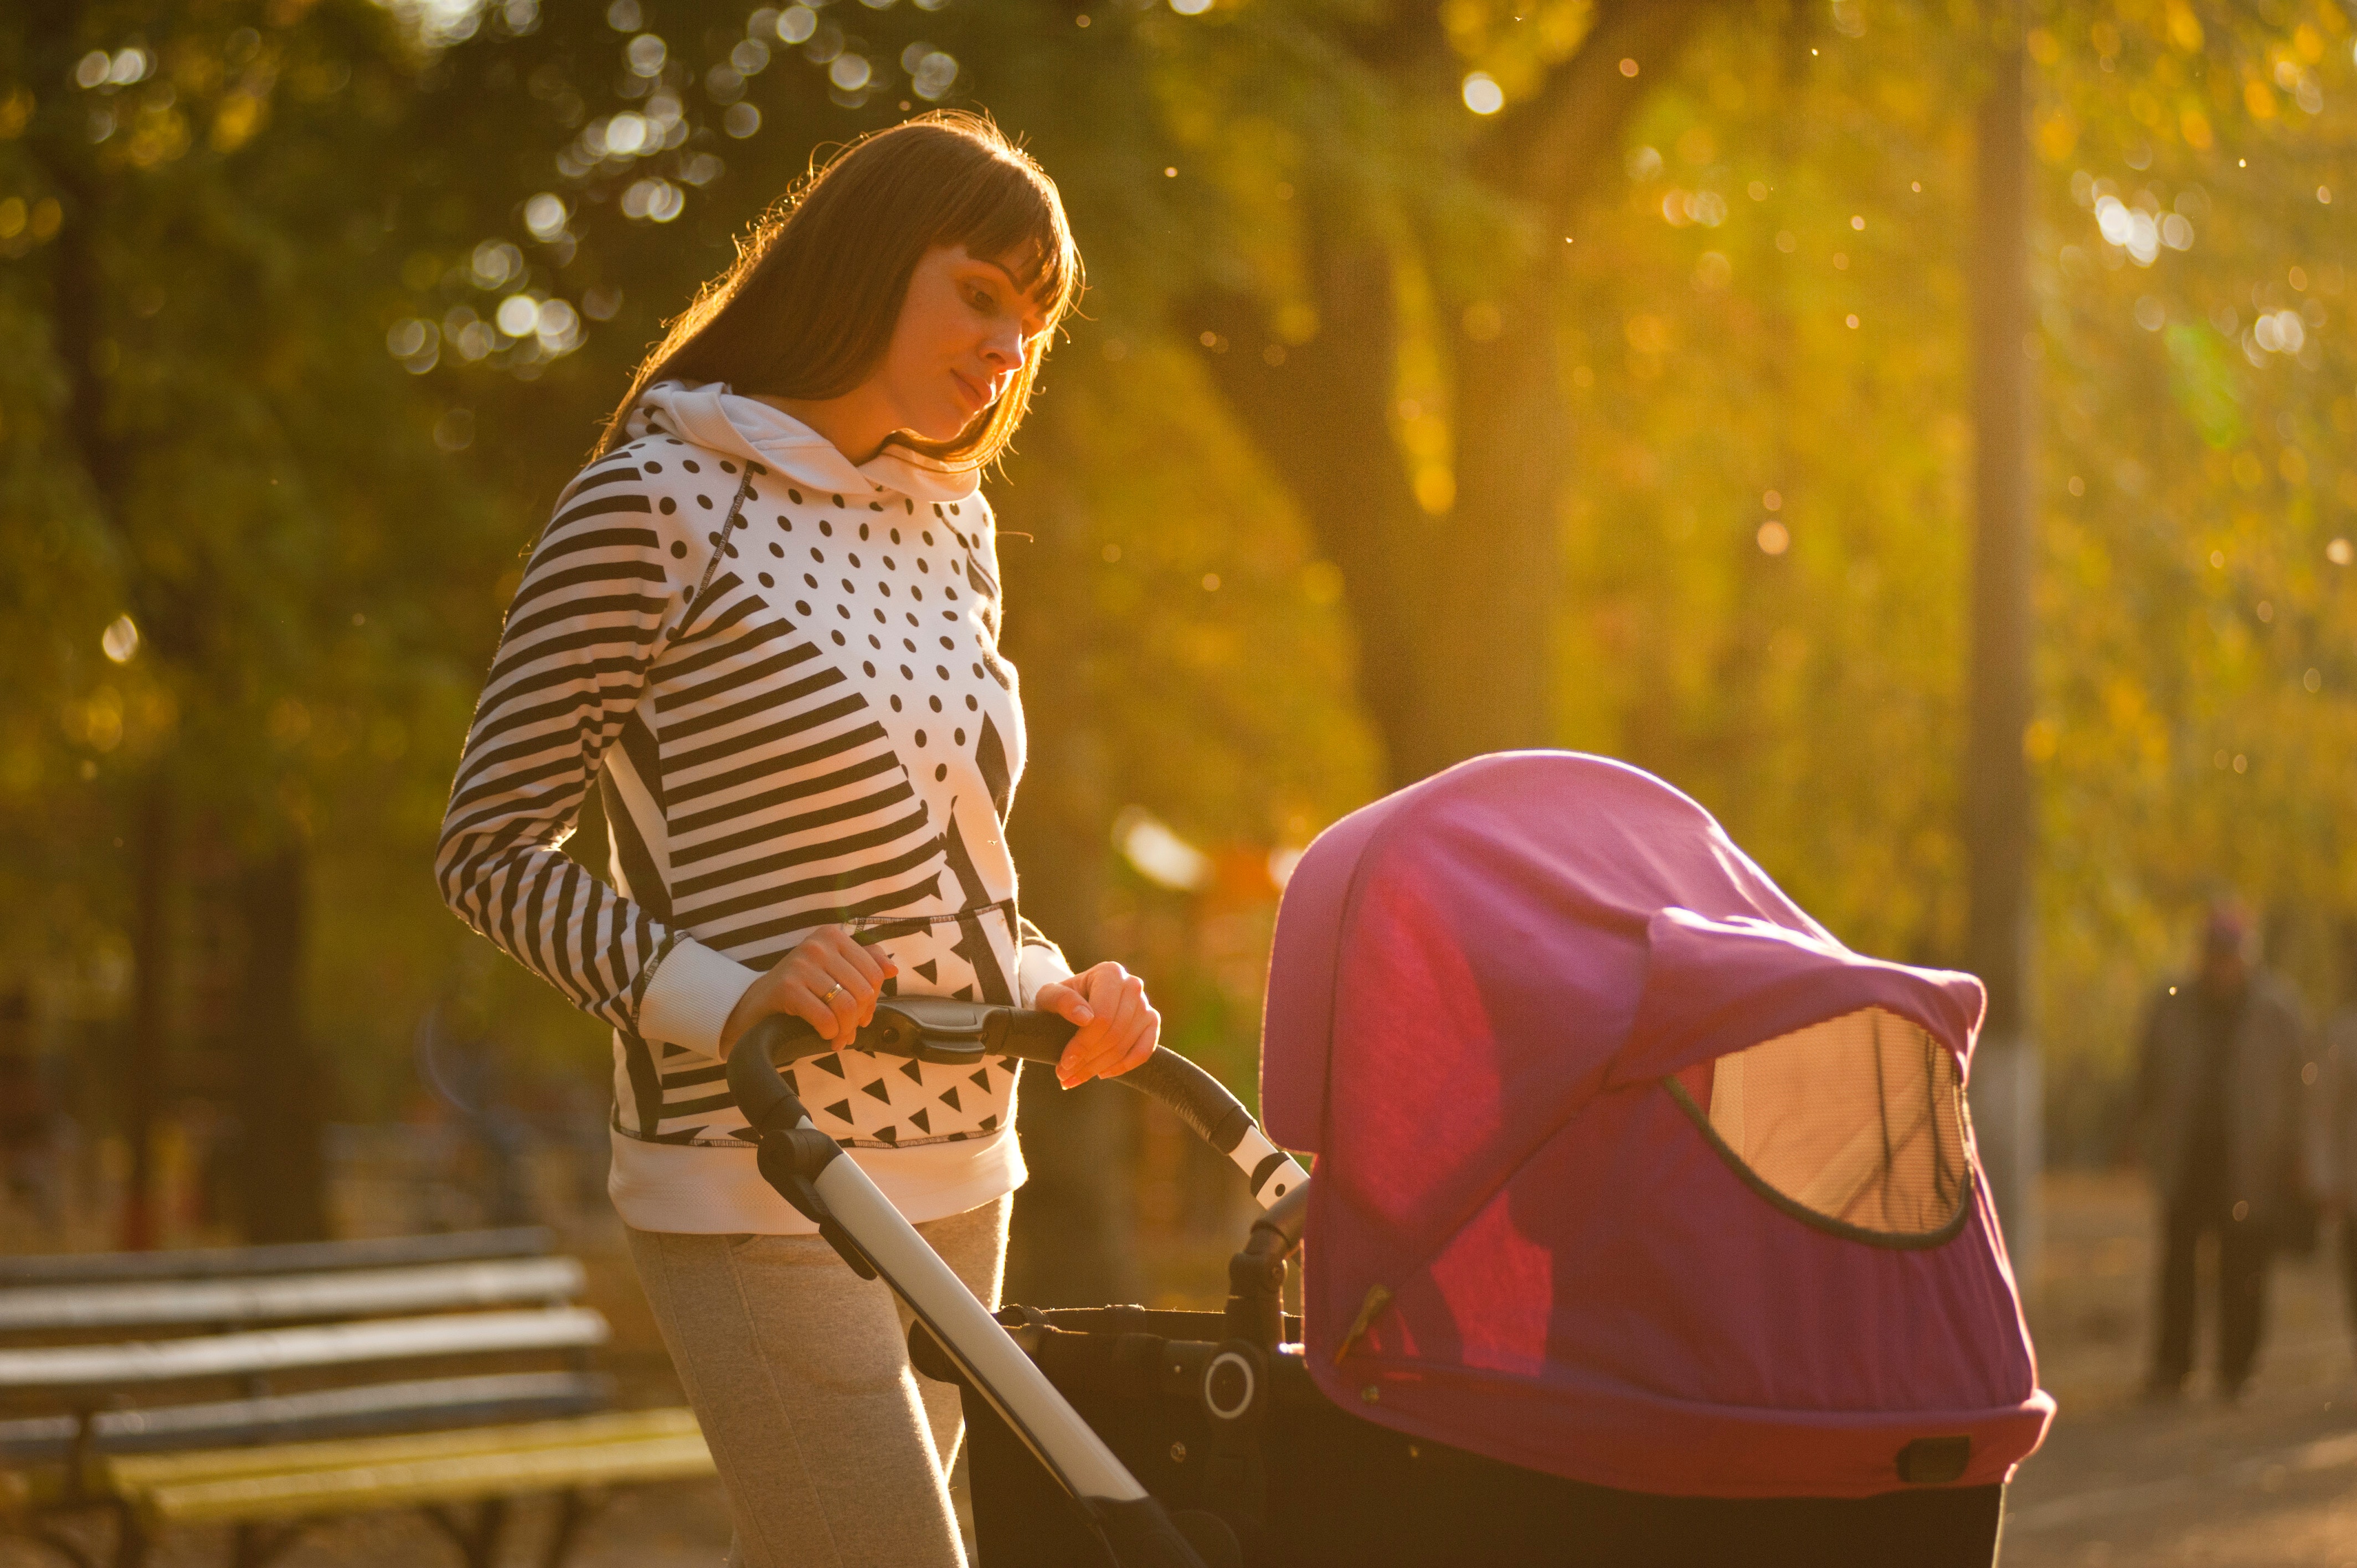 A woman pushing a baby stroller at the park | Source: Pexels